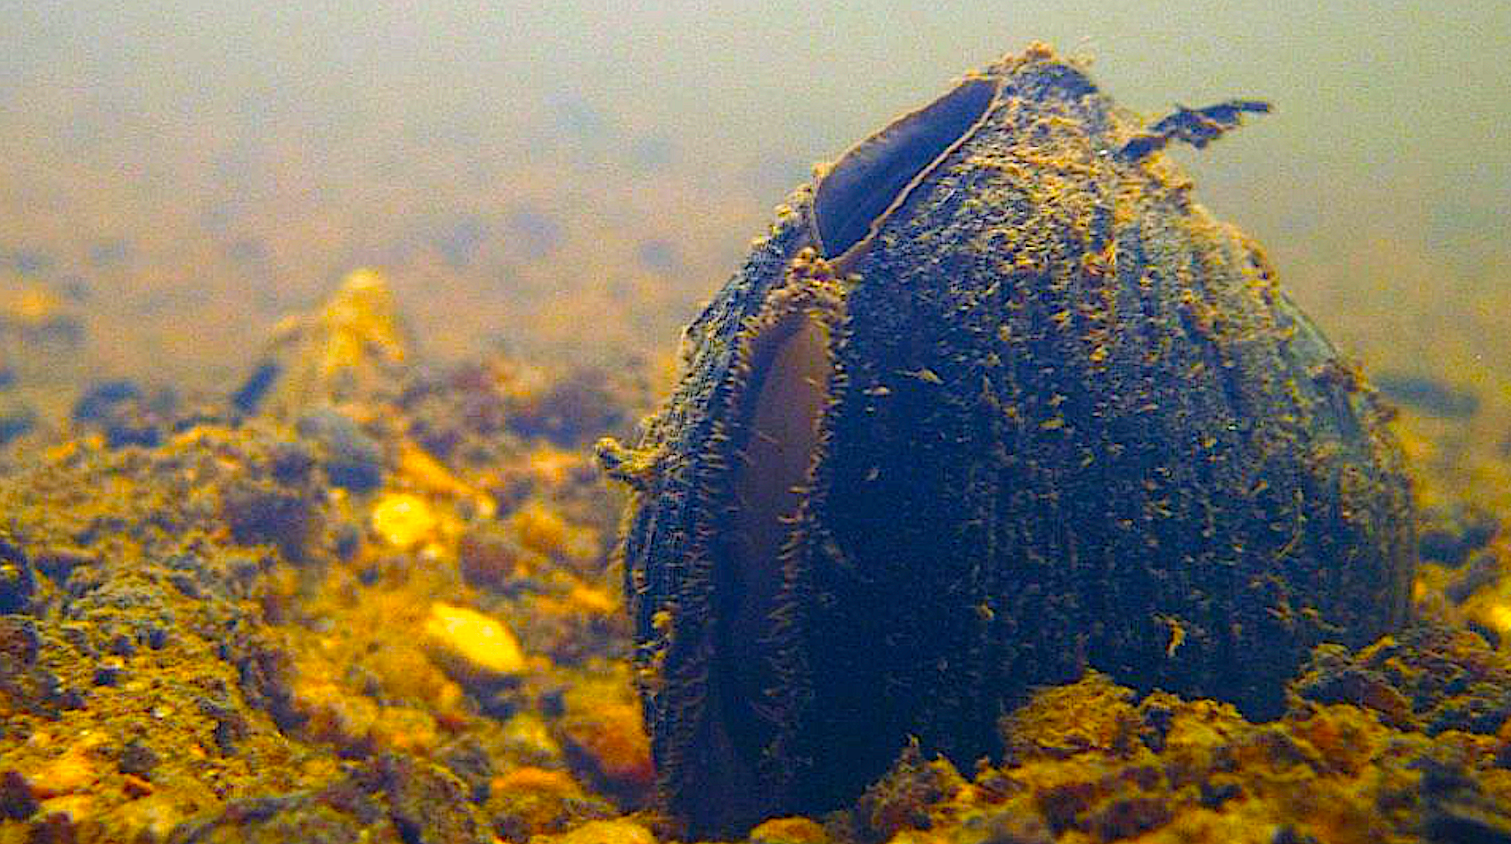 A new project to create an innovative visitor display at the Greensboro Science Center on endangered freshwater mussels is one of six Community Collaborative Research Grant initiatives that launch this year. Carolina heelsplitter, courtesy of USFWS.